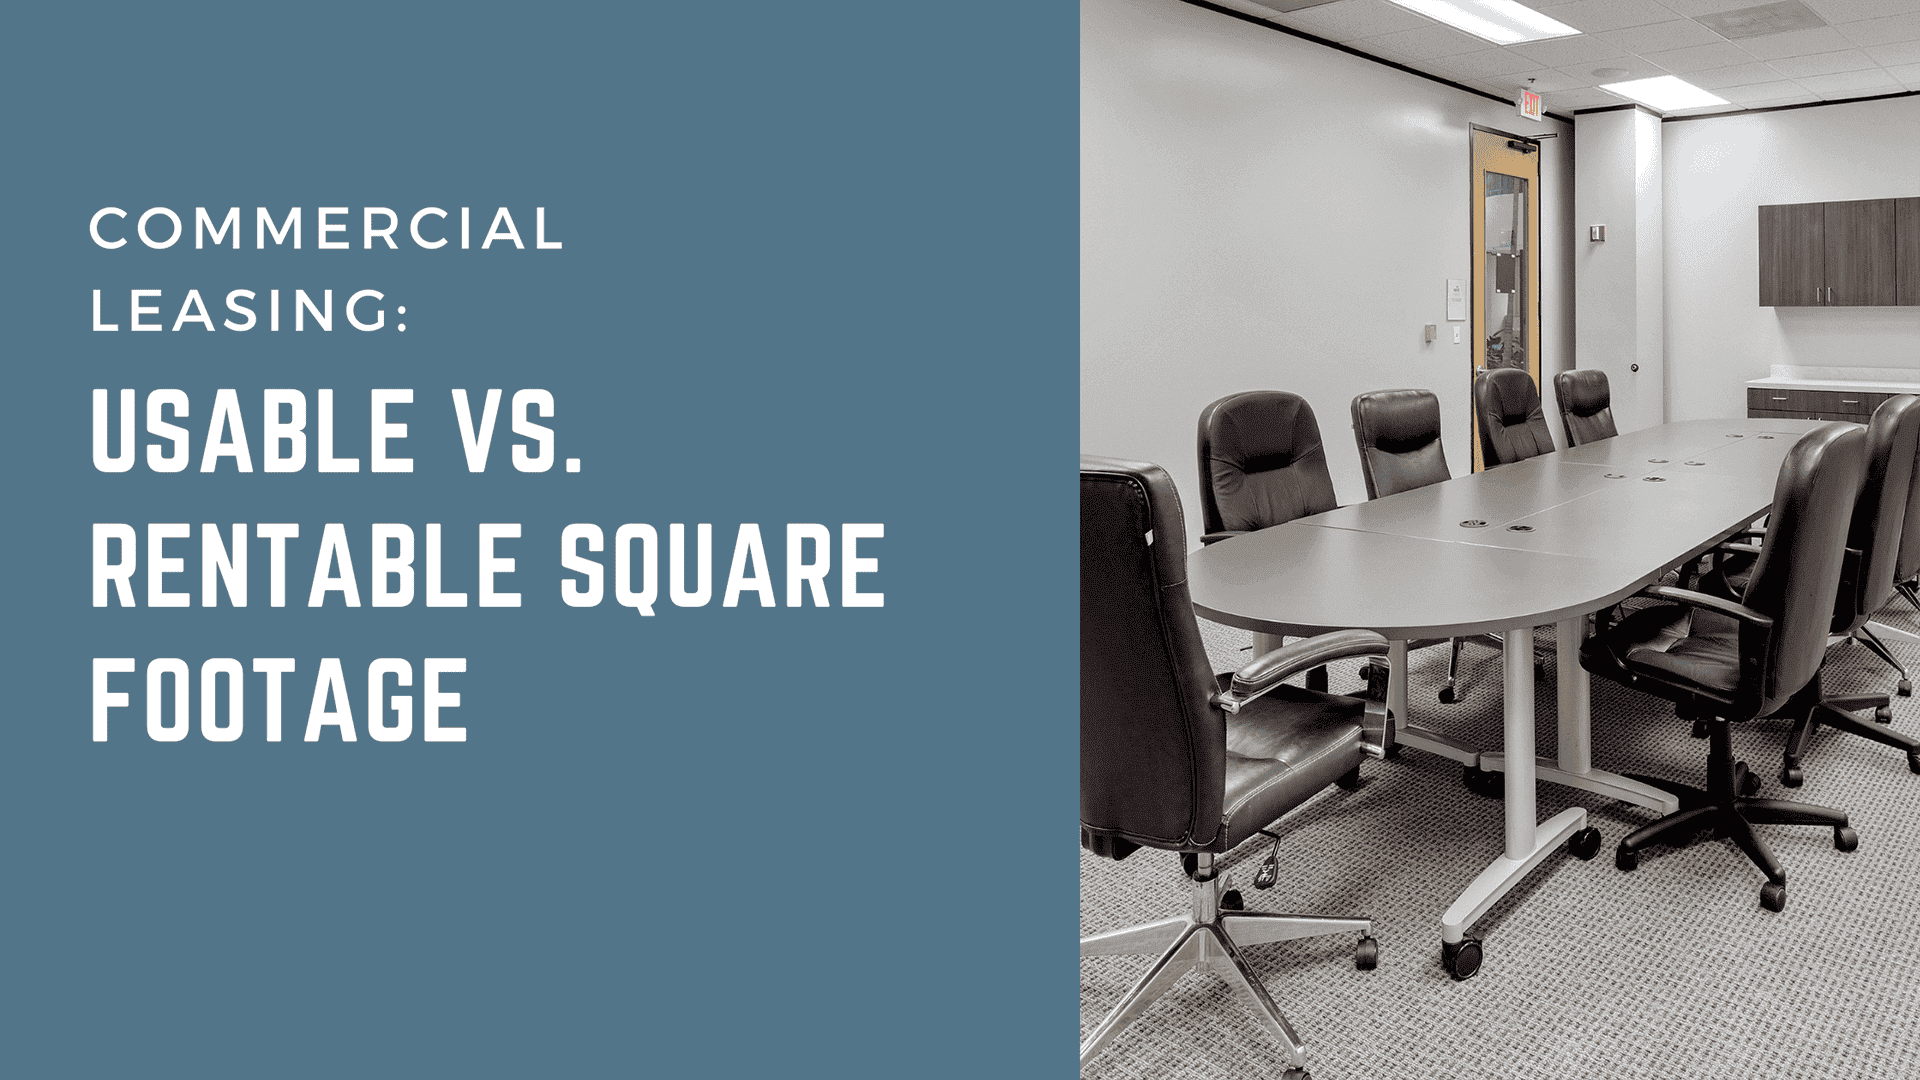 Commercial Leasing: Usable Square Footage vs Rentable Square Footage